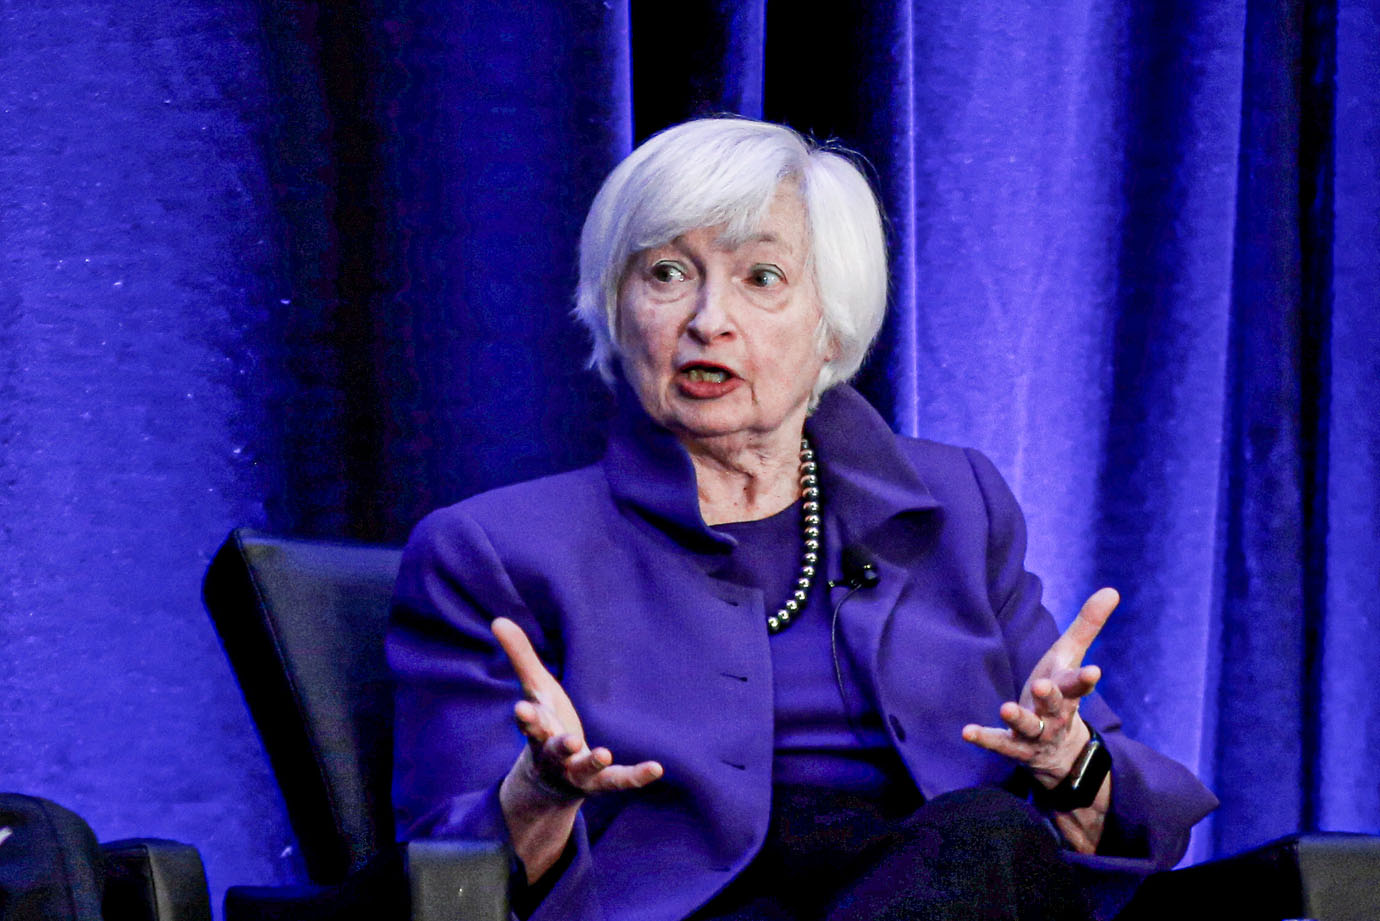 Former Federal Reserve Chair Janet Yellen speaks during a panel discussion at the American Economic Association/Allied Social Science Association (ASSA) 2019 meeting on January 4, 2019 in Atlanta, Georgia, USA.  Reuters / Christopher Aluca Berry